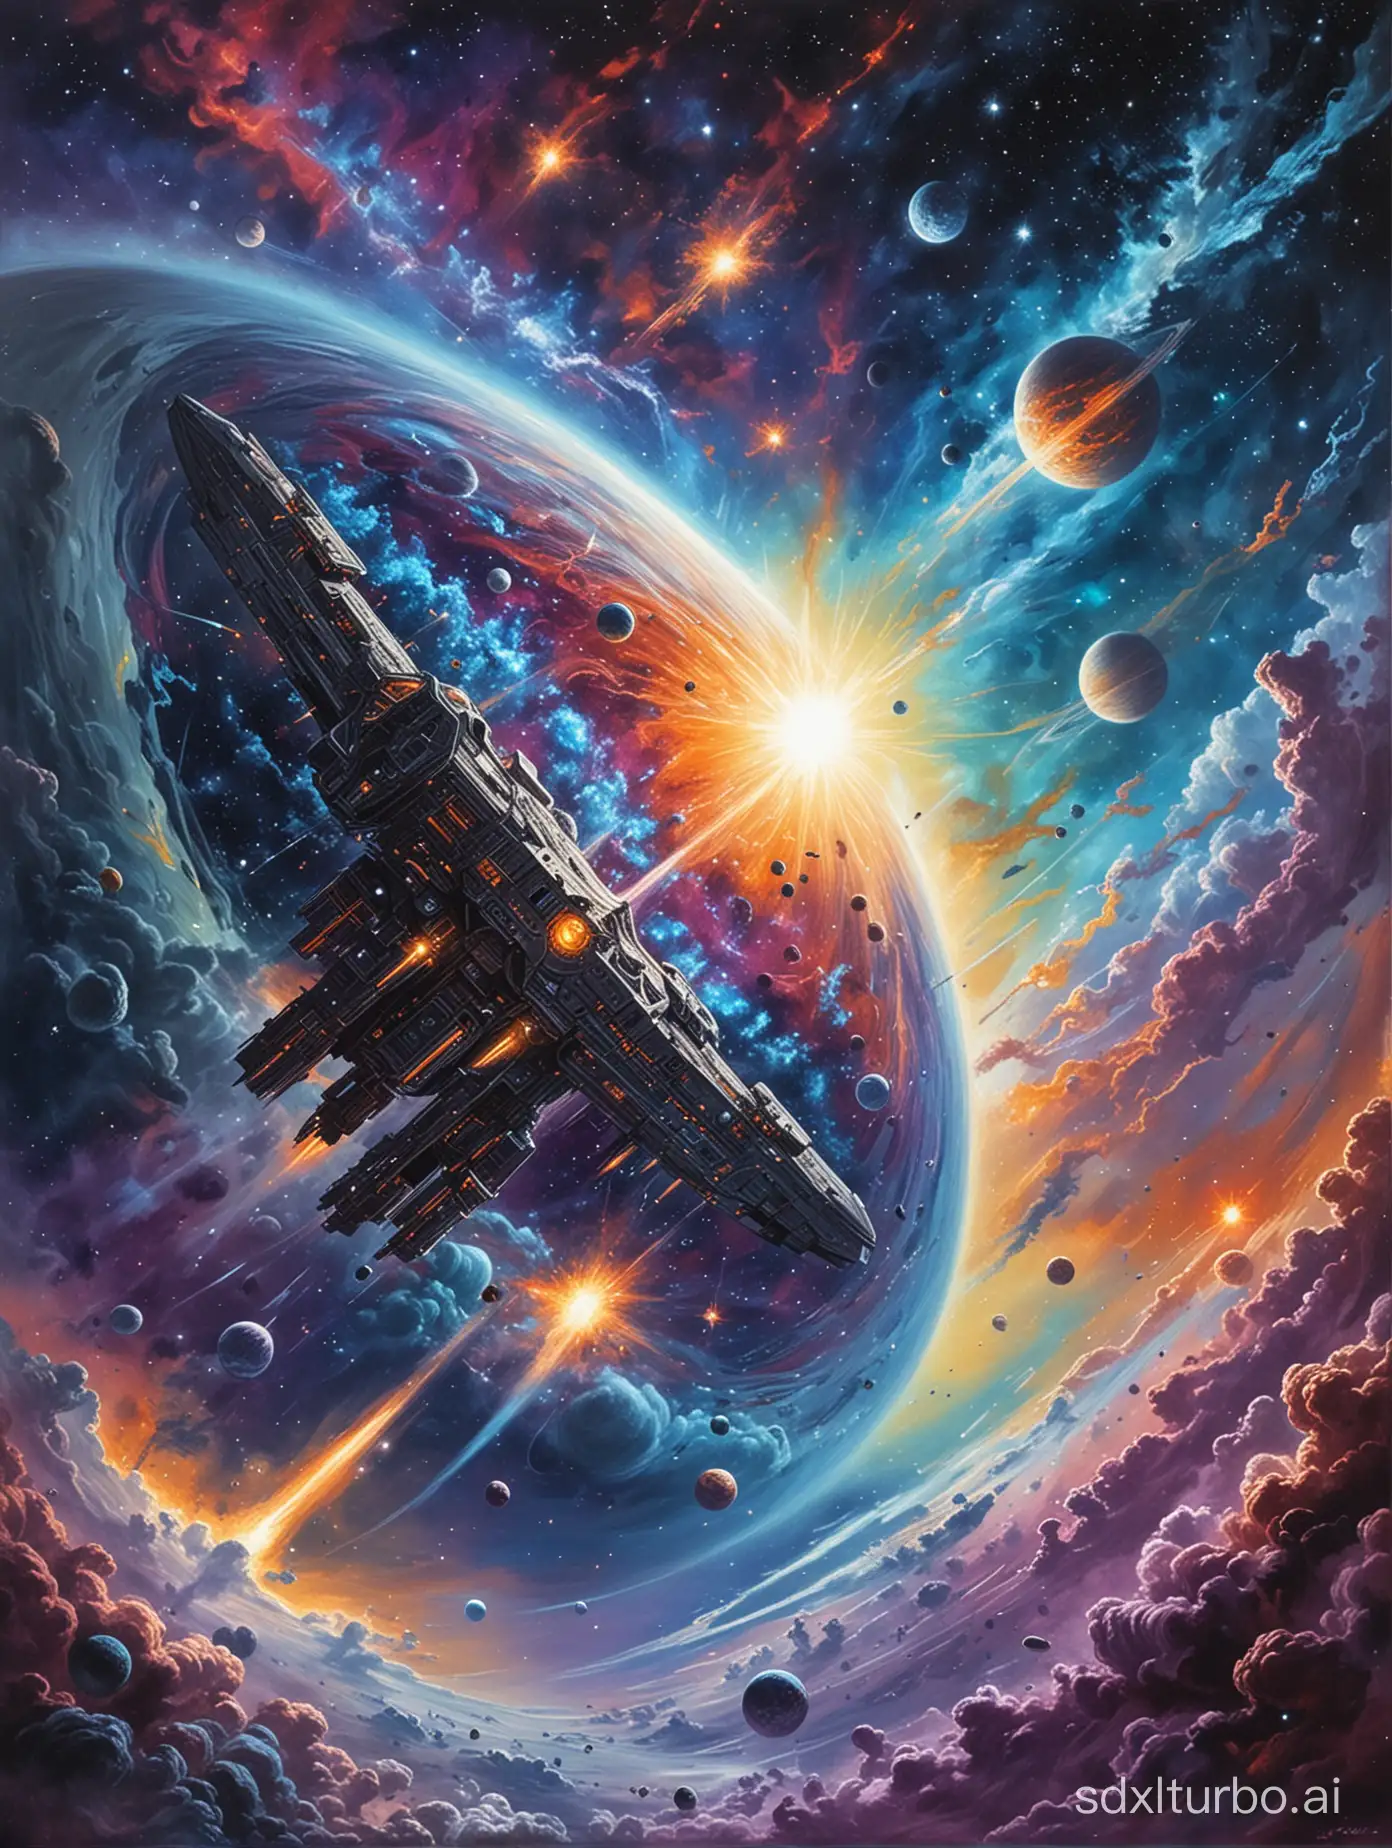 Cosmic science fiction painting